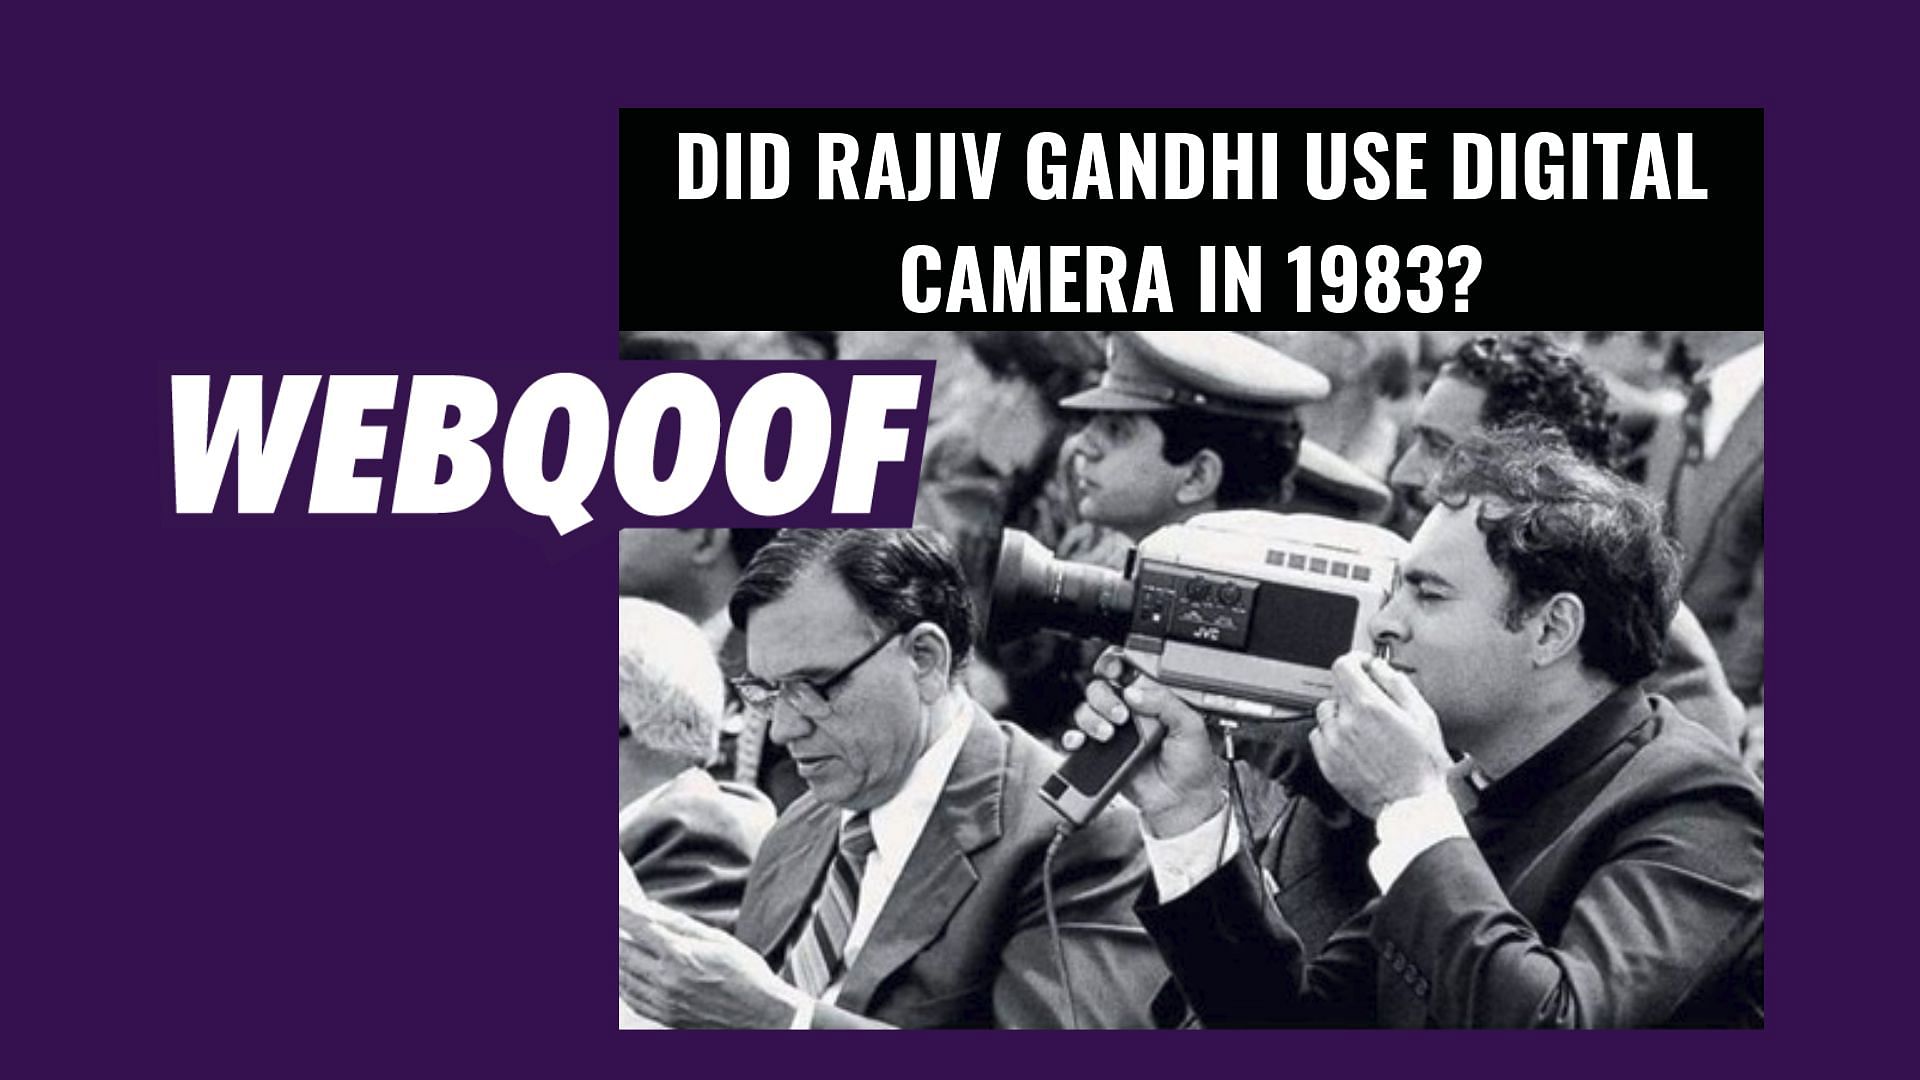 A viral image falsely claims that Rajiv Gandhi used a digital camera in 1983.